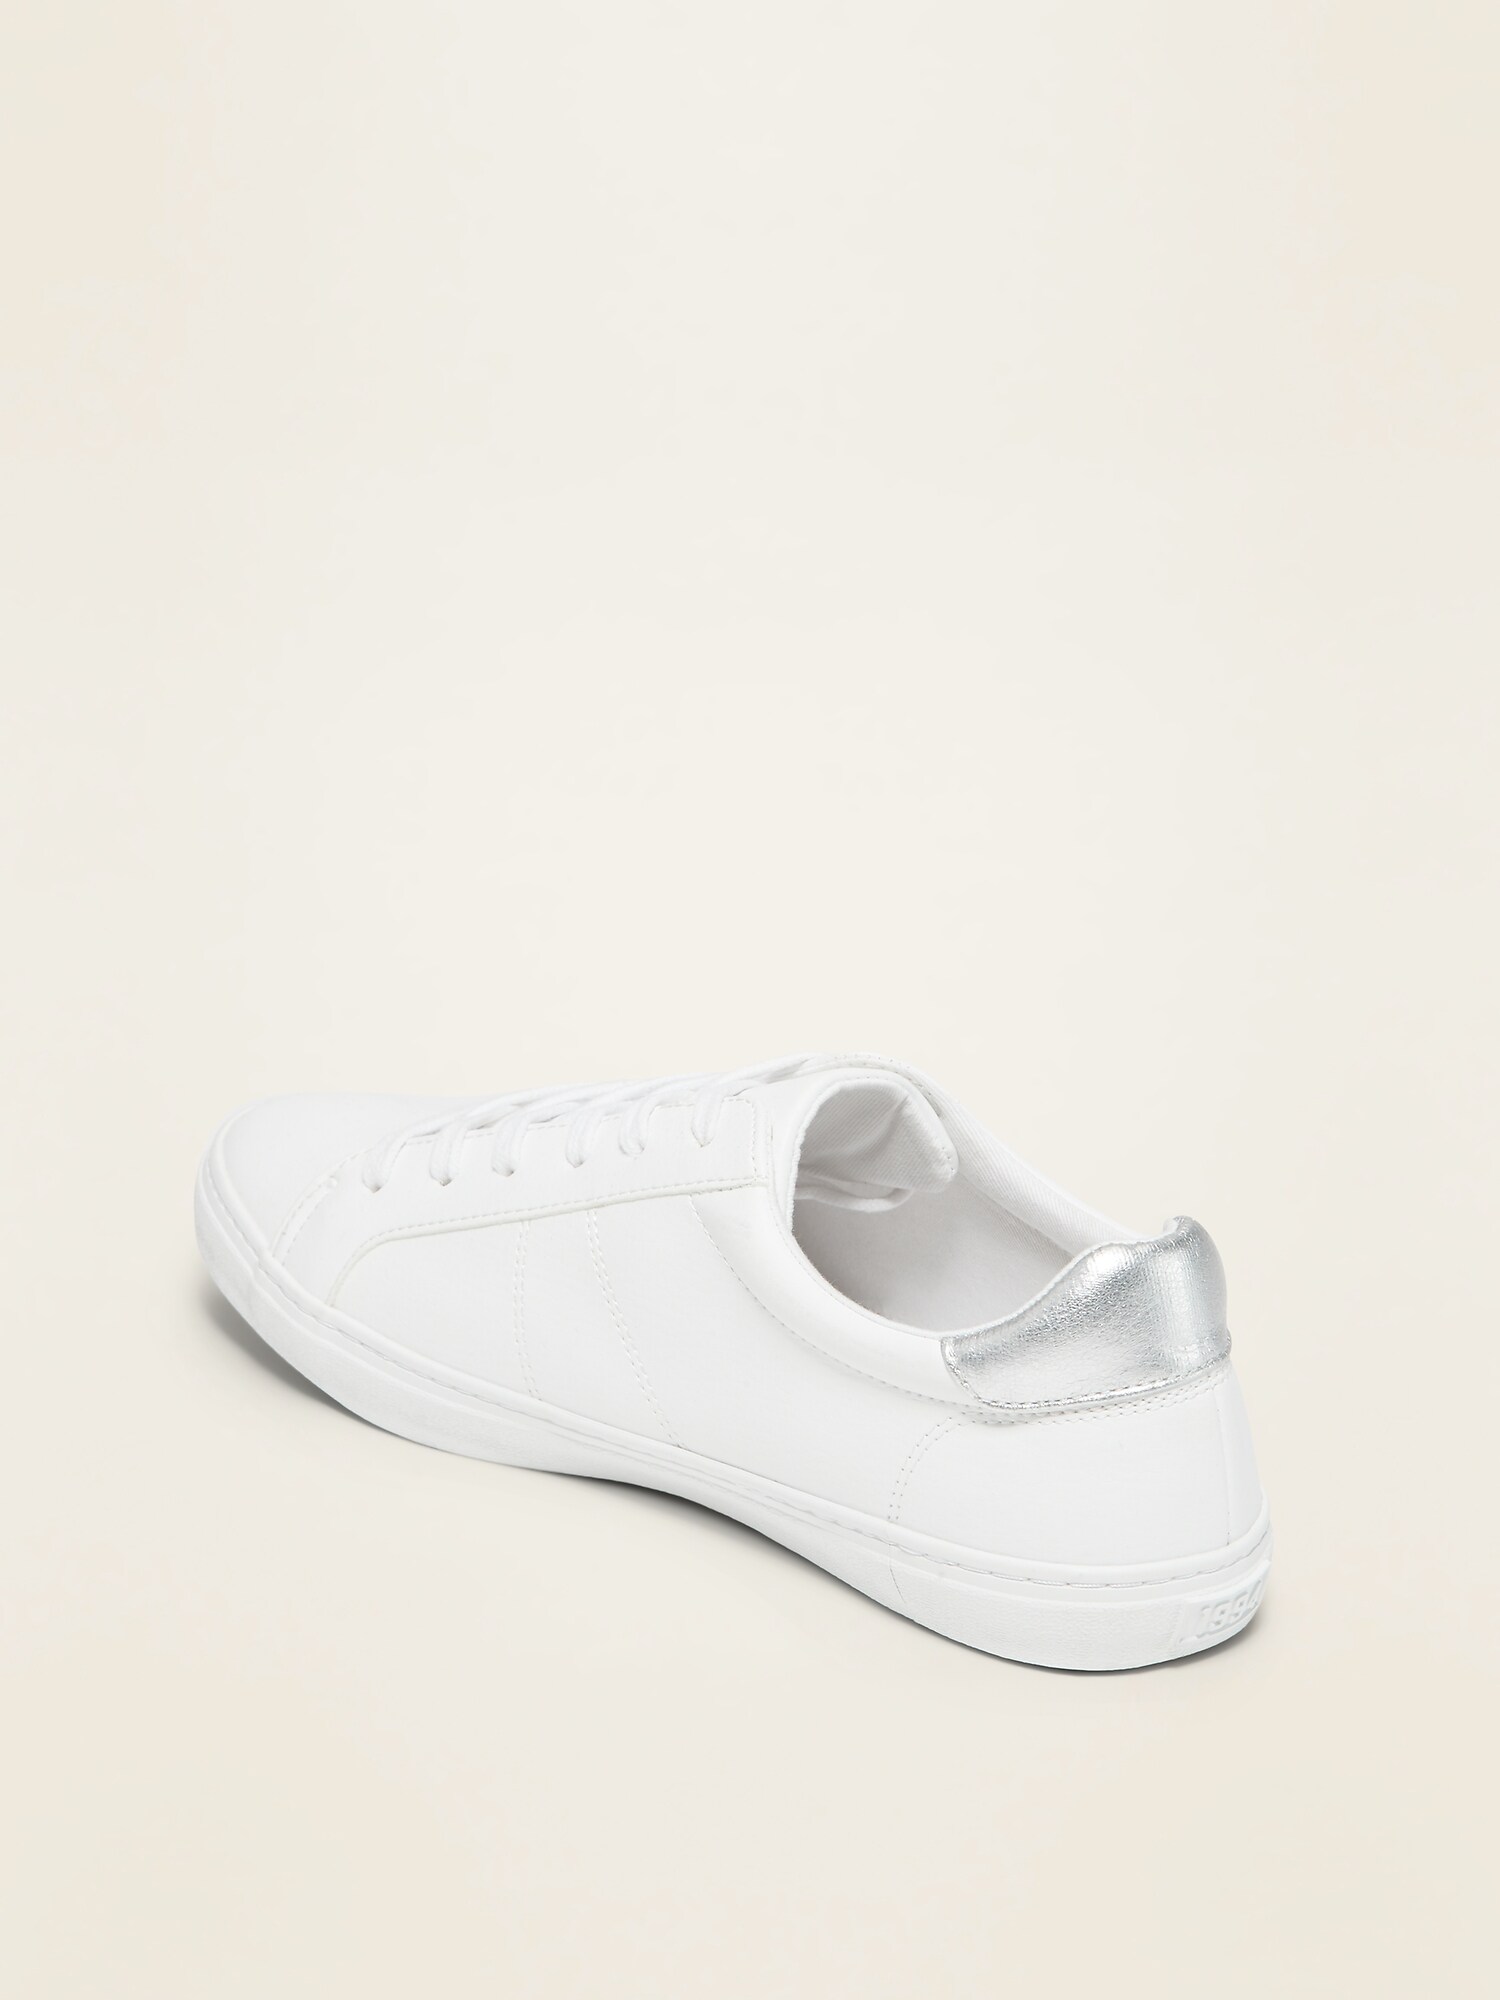 old navy womens tennis shoes